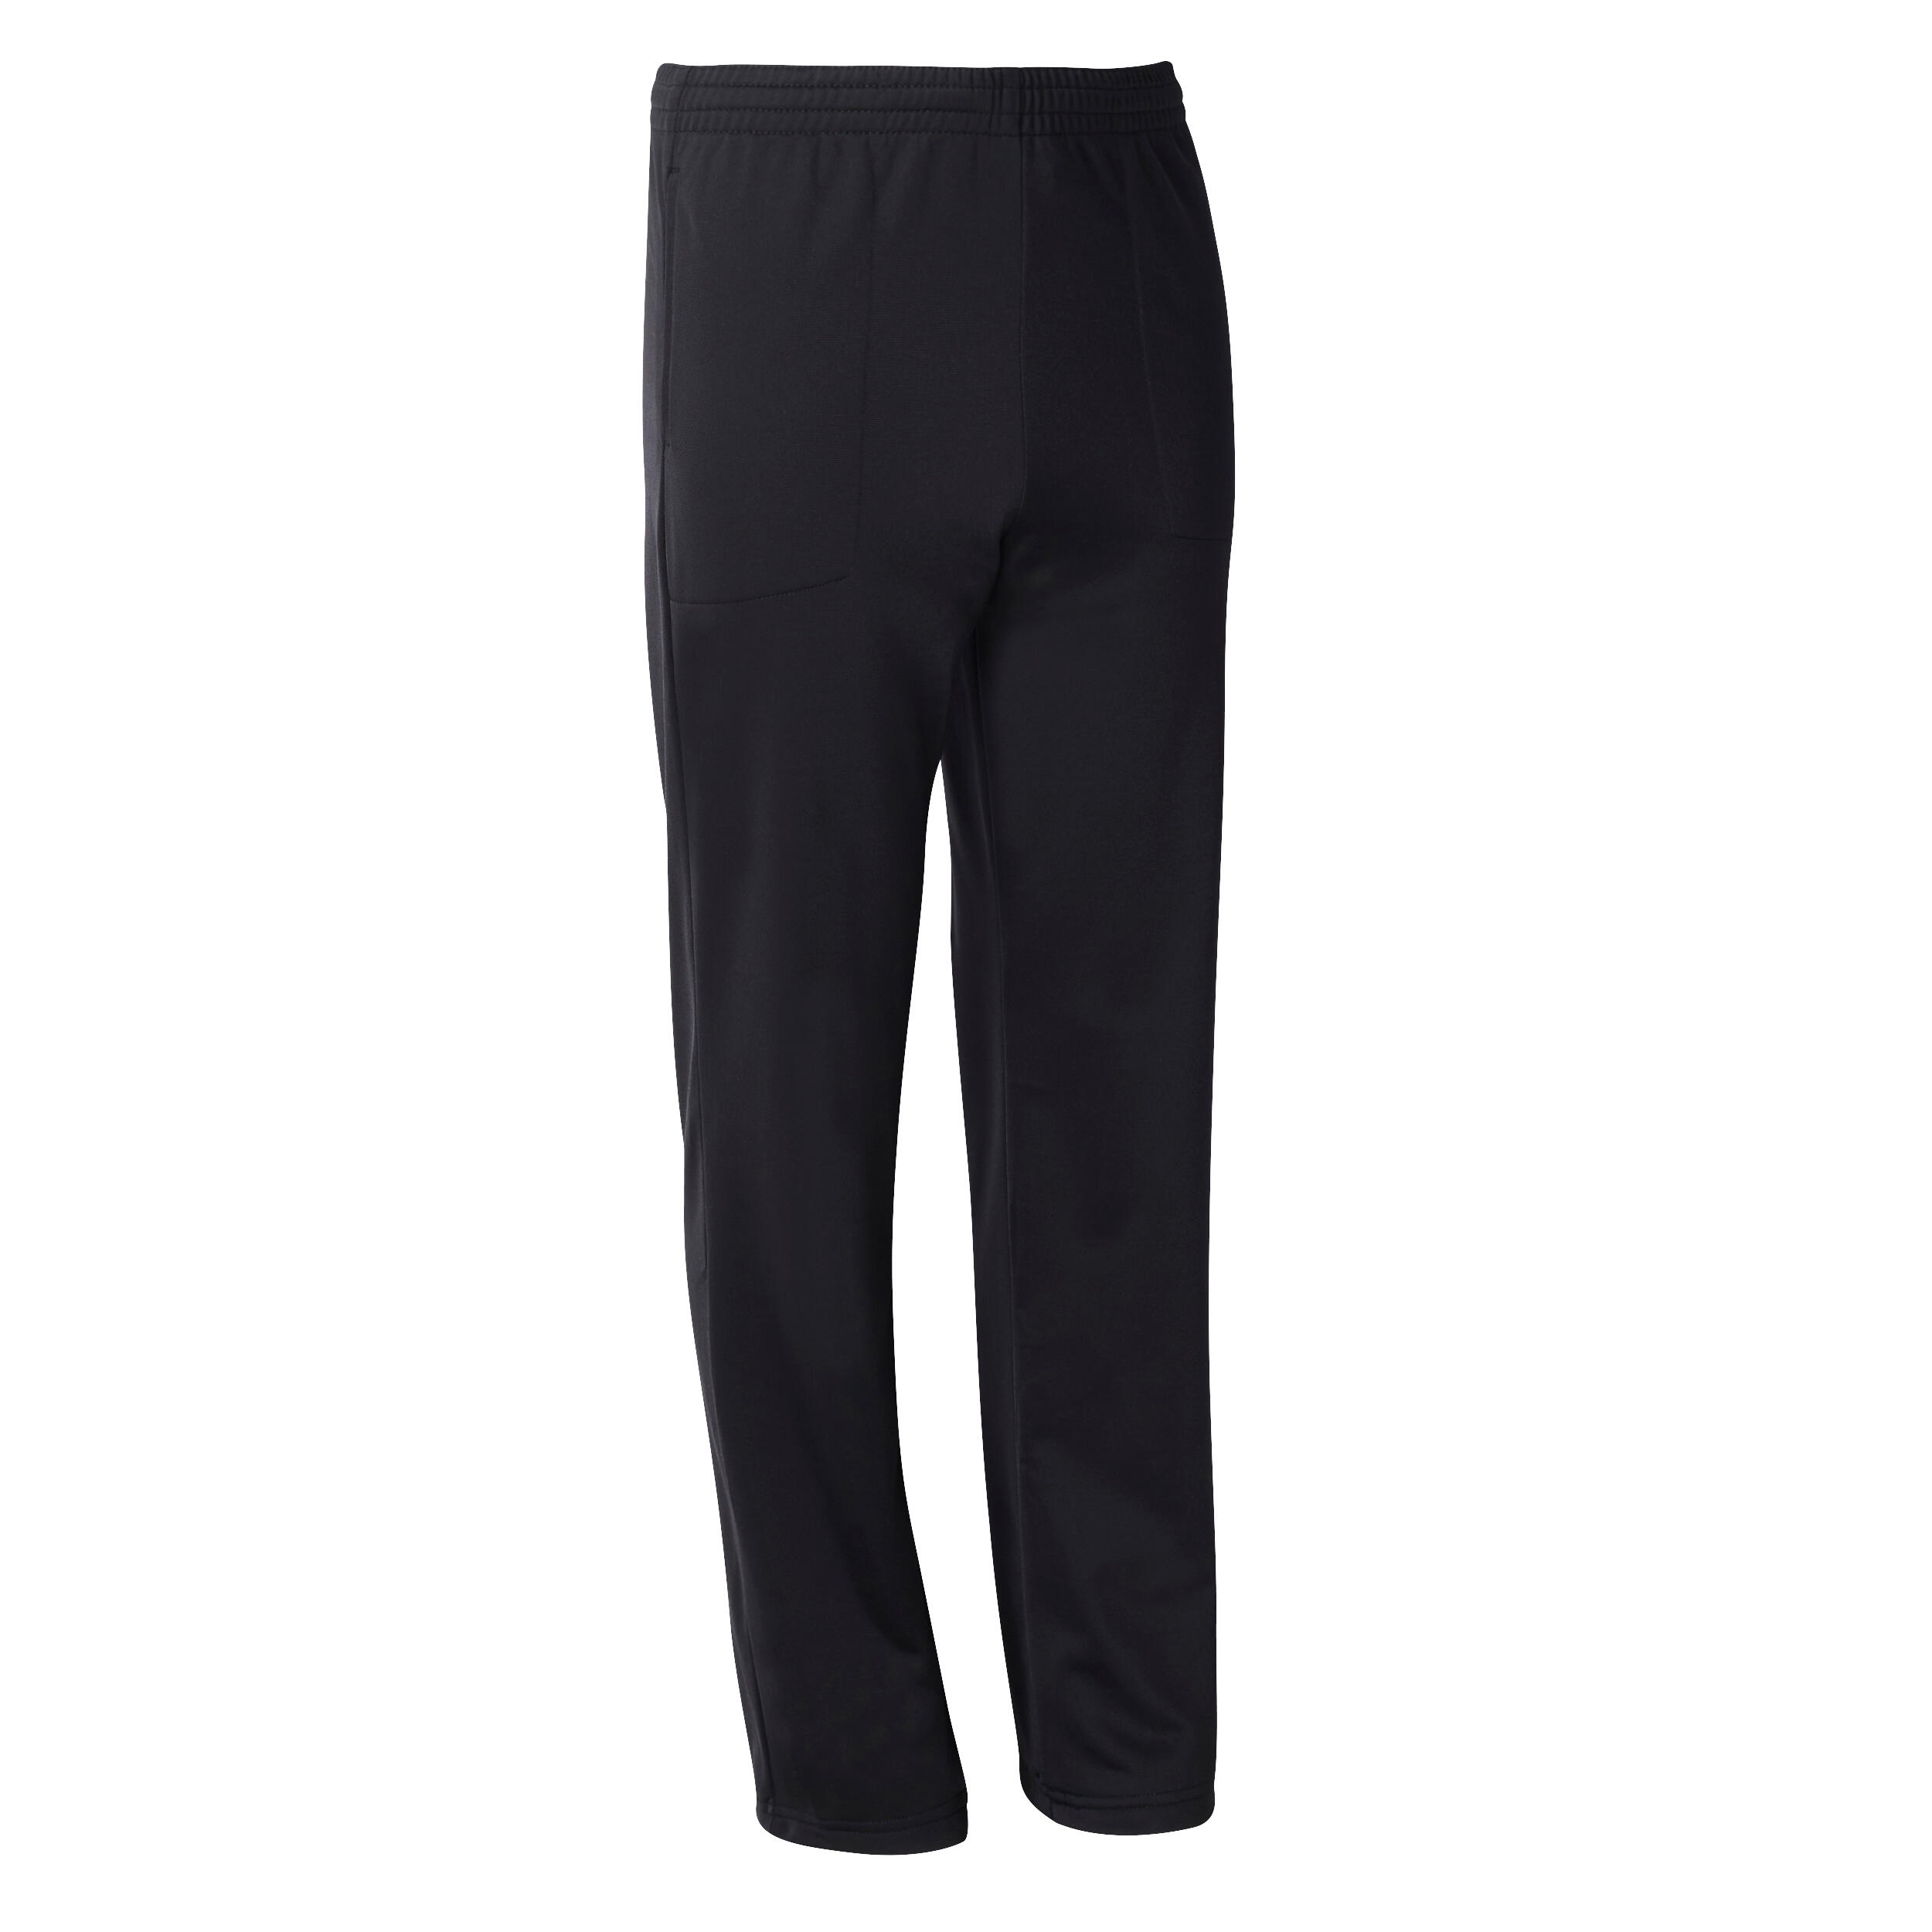 Kids' Warm Breathable Synthetic Jogging Bottoms - Black 1/6